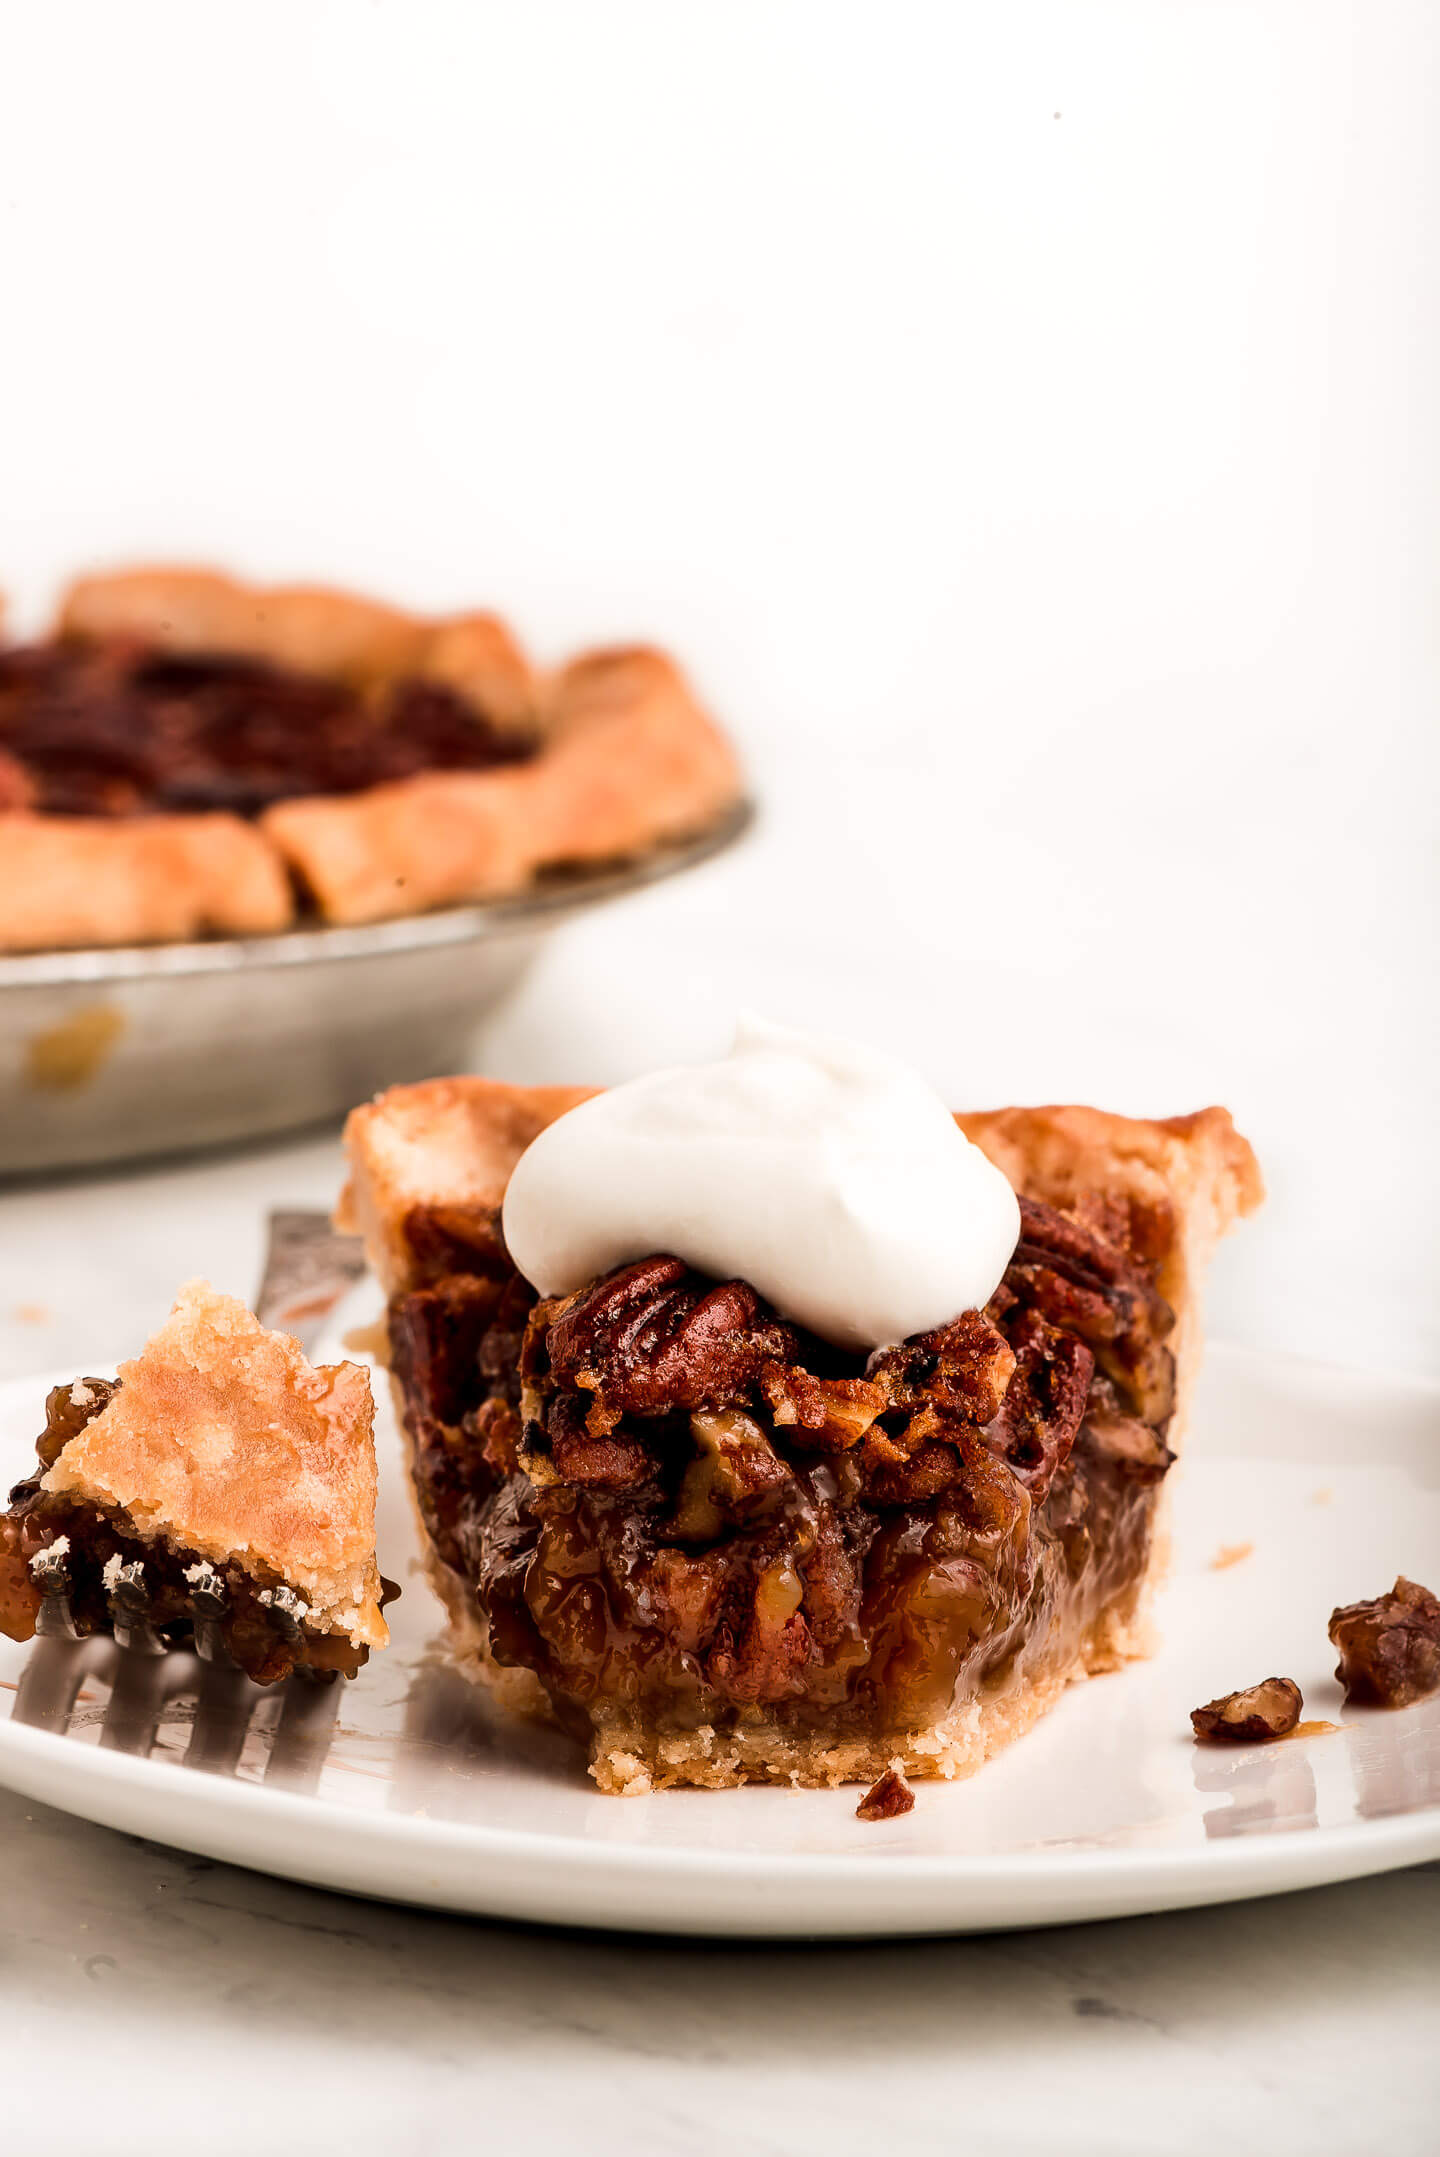 A slice of Pecan Pie with whipped cream and a bit taken out on a fork to the side.